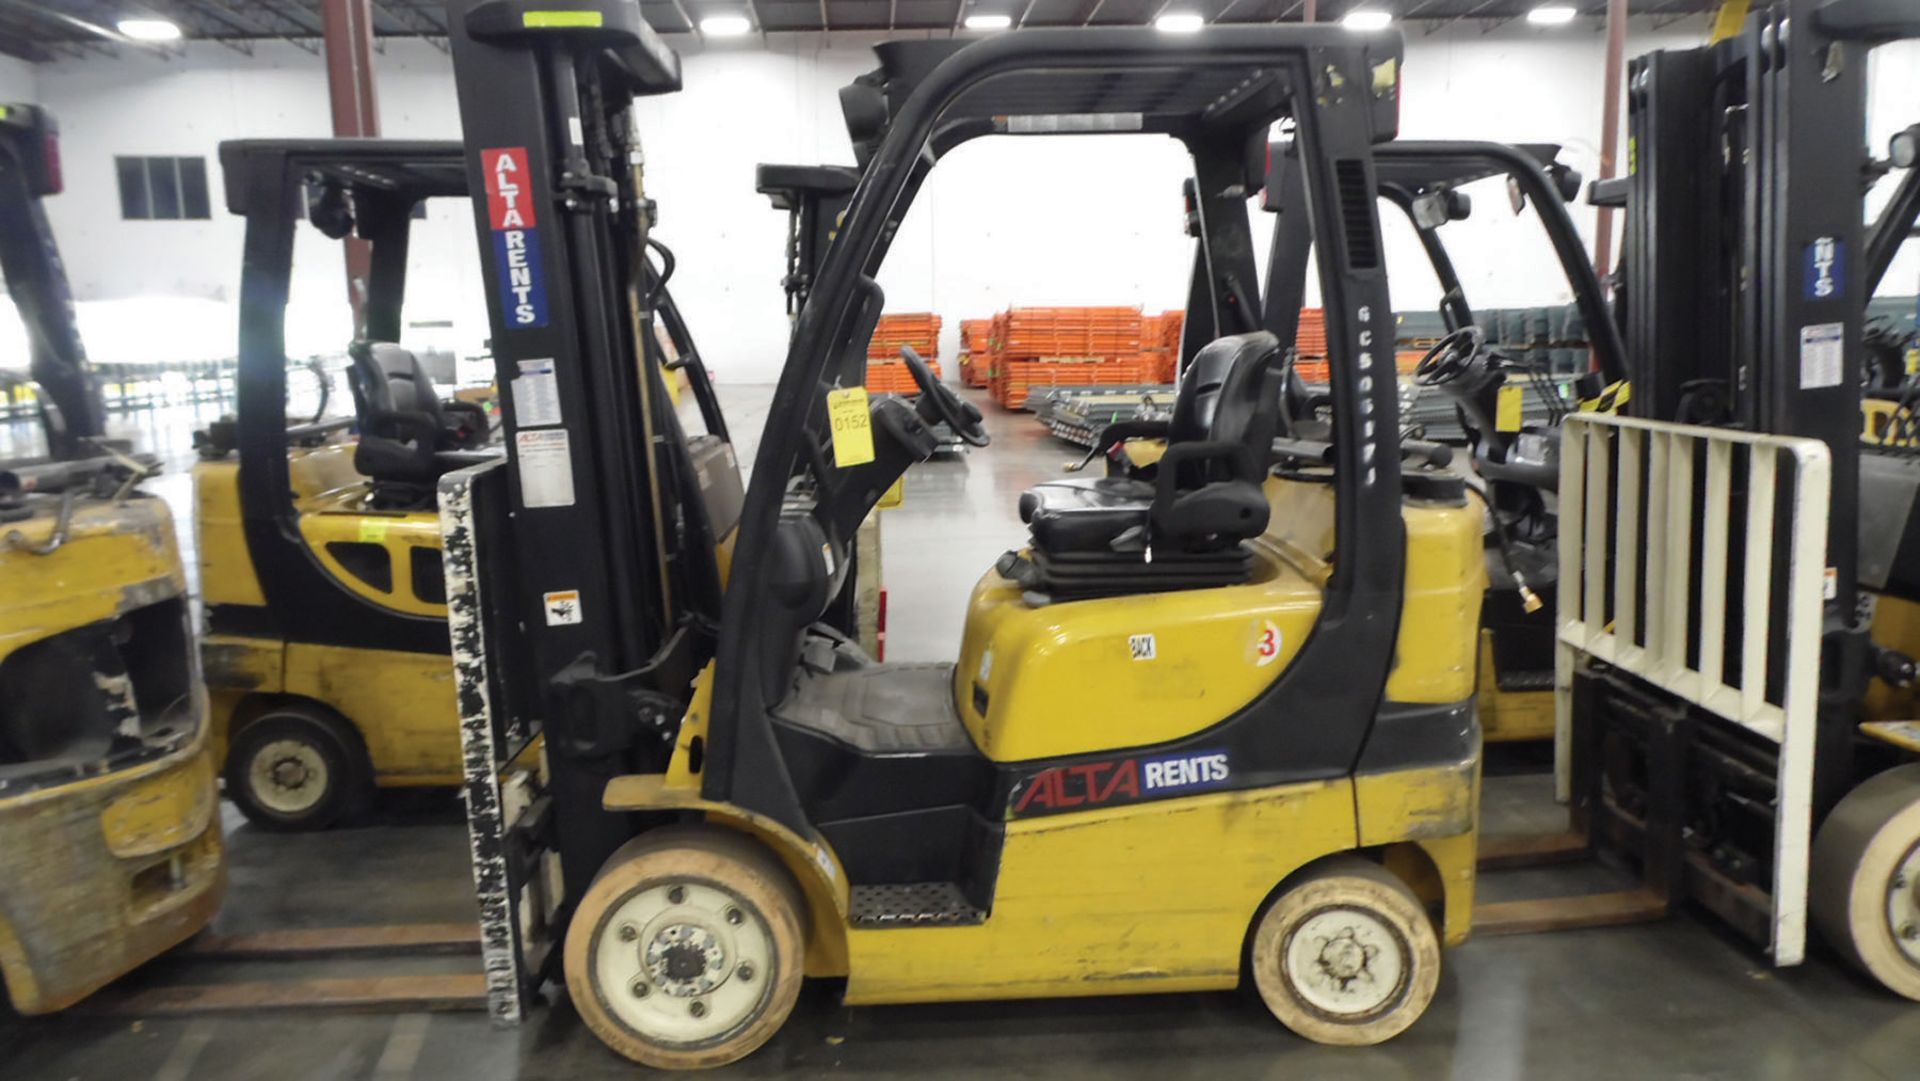 2011 YALE 5,000 LB. CAPACITY FORKLIFT; MODEL GLX050VXNVRE088, SOLID NON-MARKING TIRES, 3-STAGE MAST,